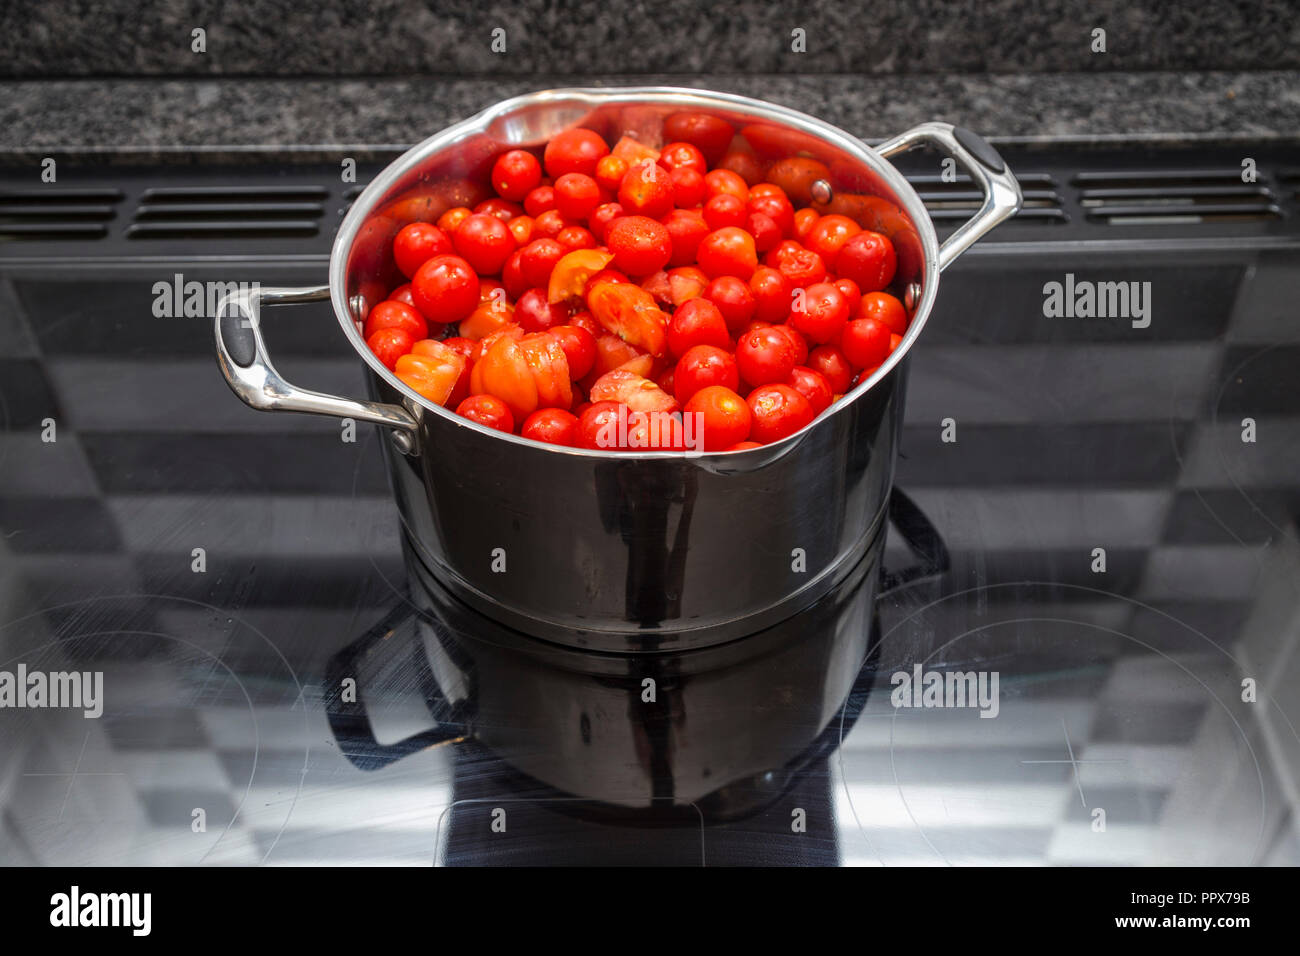 A large pan full of tomatoes on an induction hob ready to make tomato soup Stock Photo